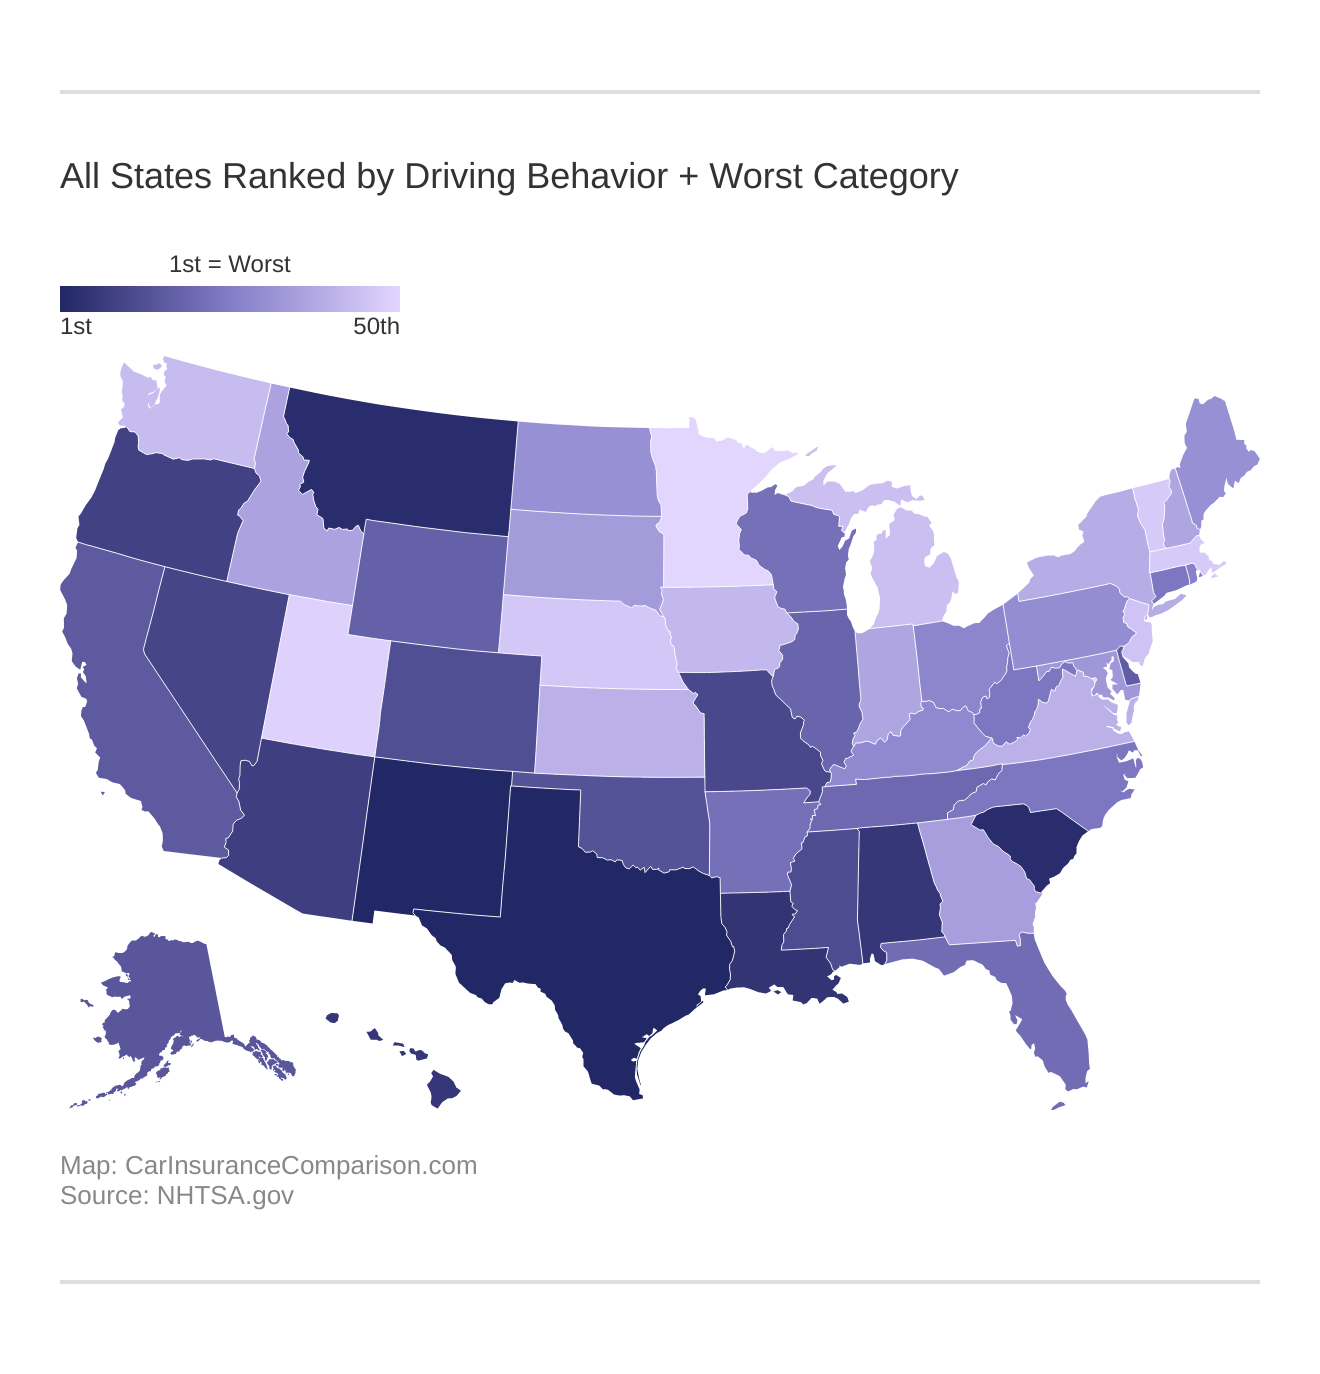 All States Ranked by Driving Behavior + Worst Category